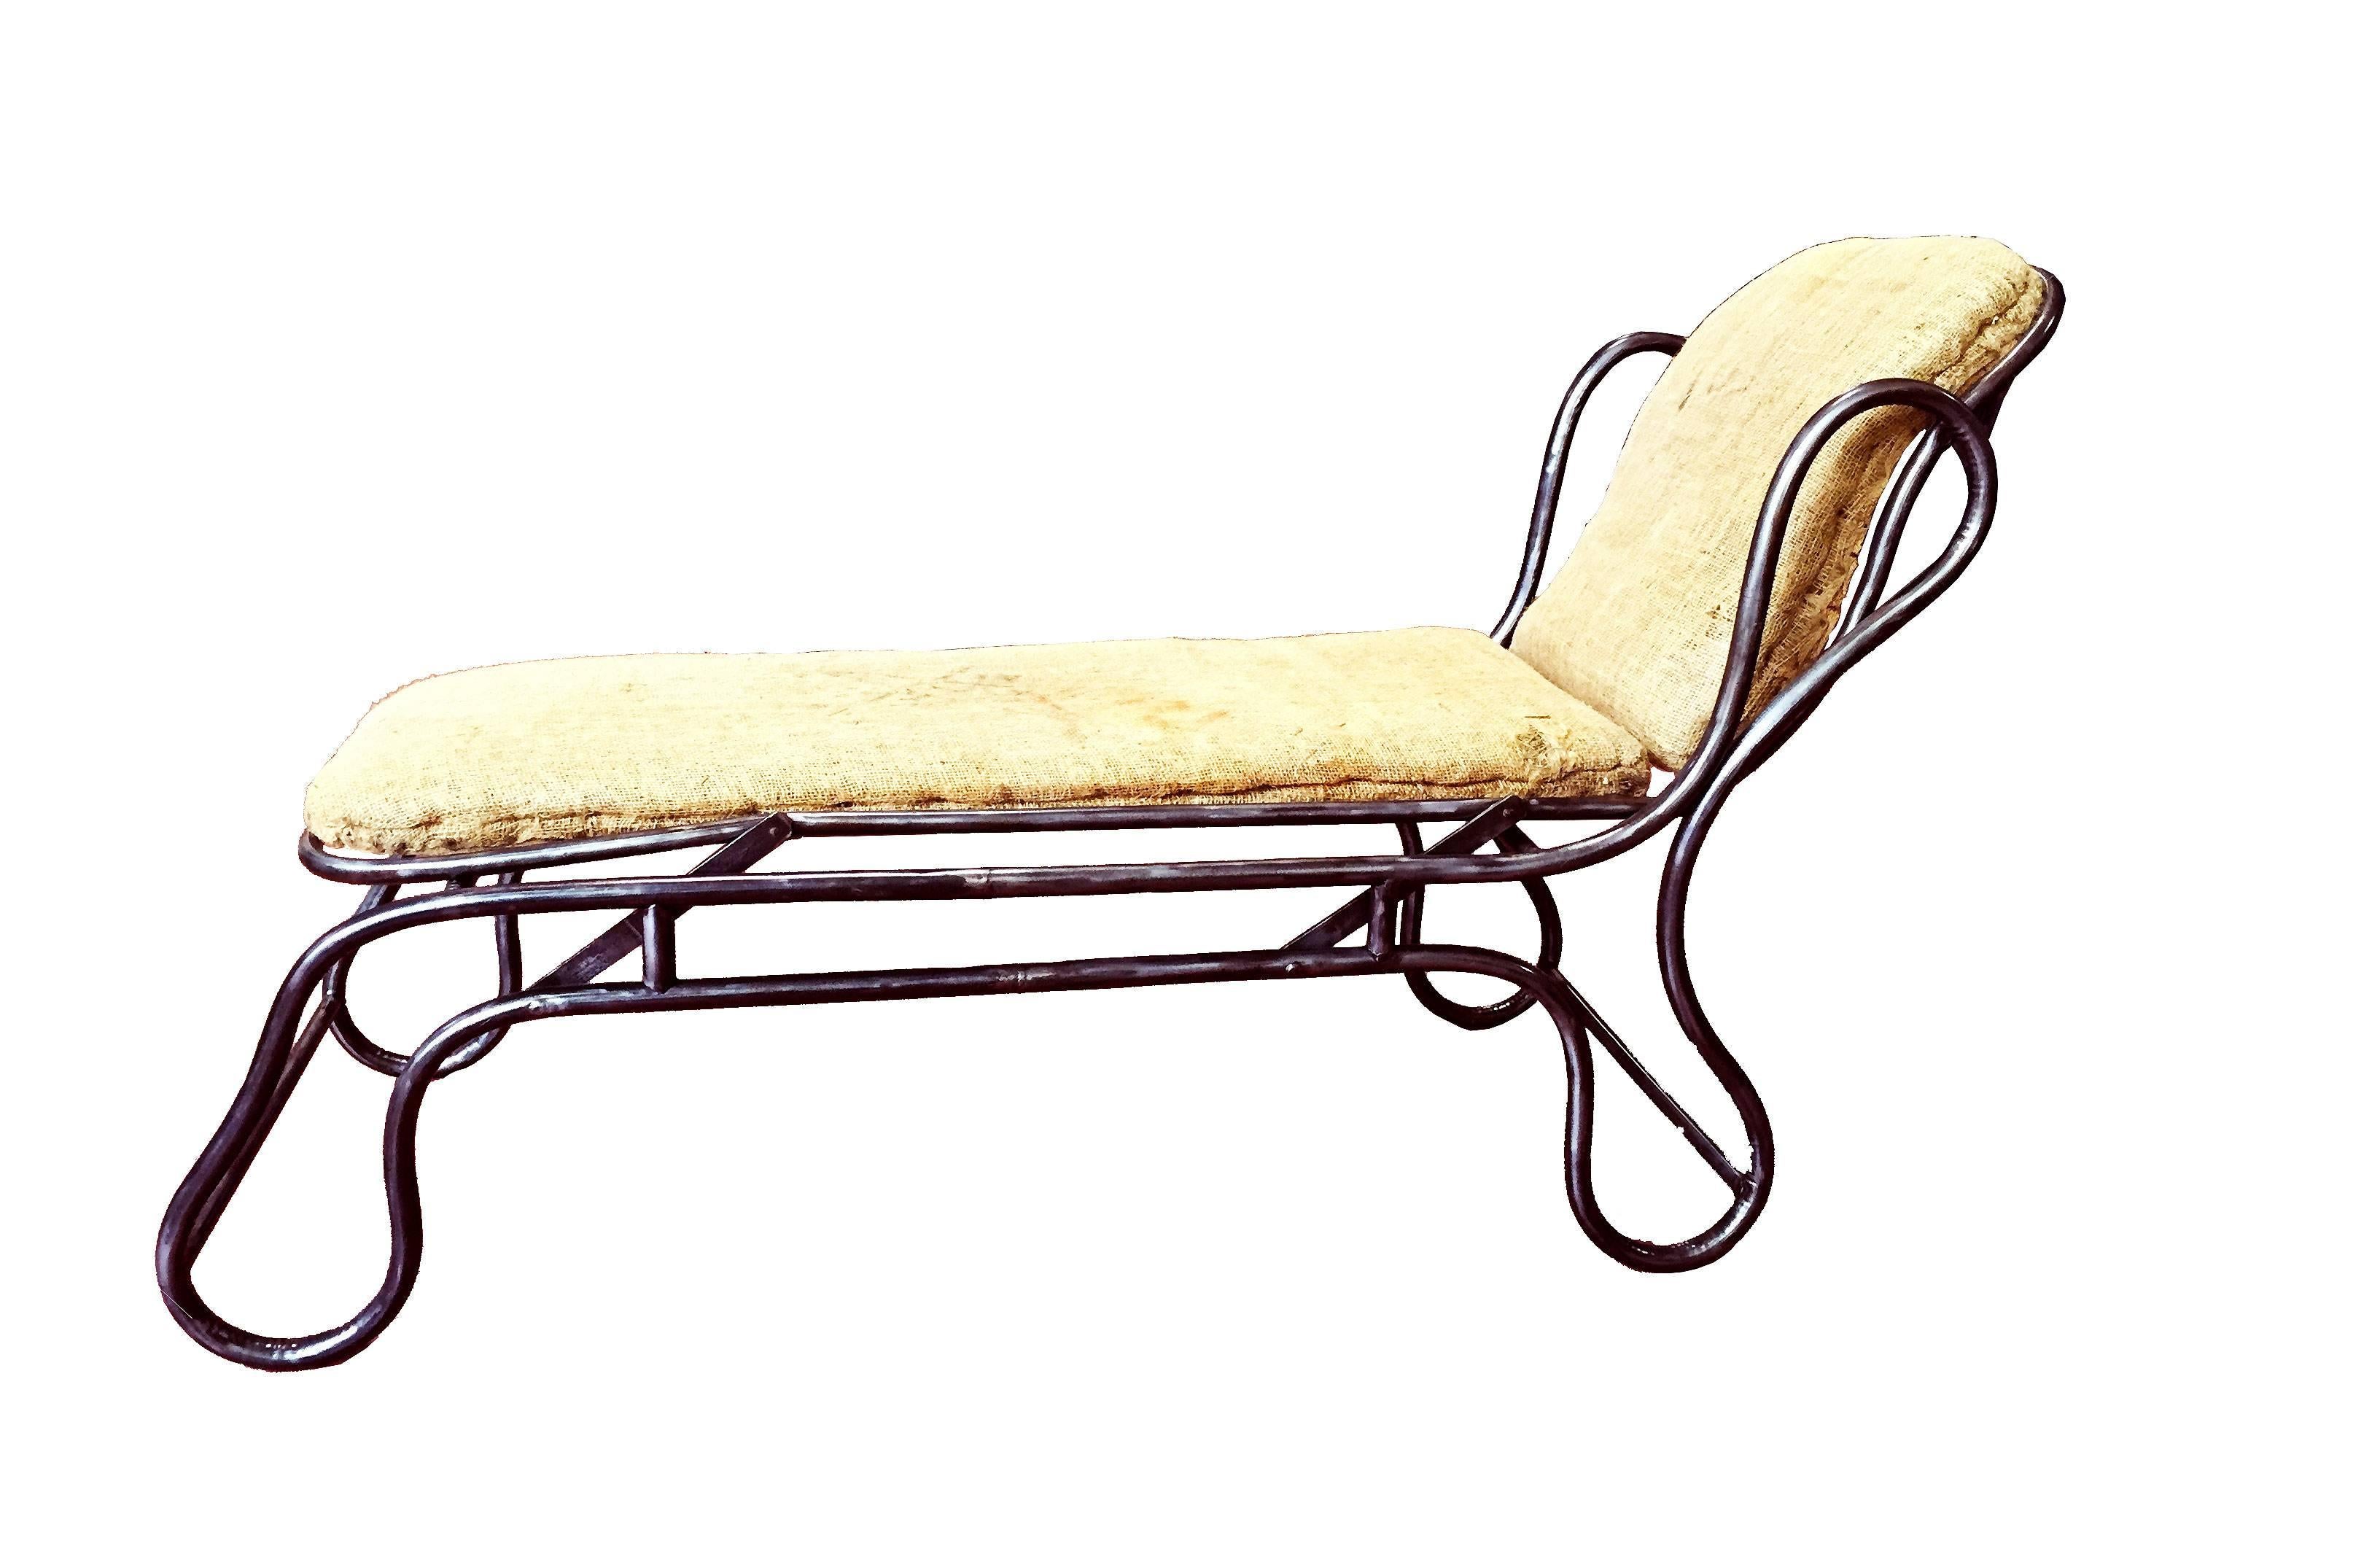 Industrial Adjustable Chaise Longue, France, circa 1900